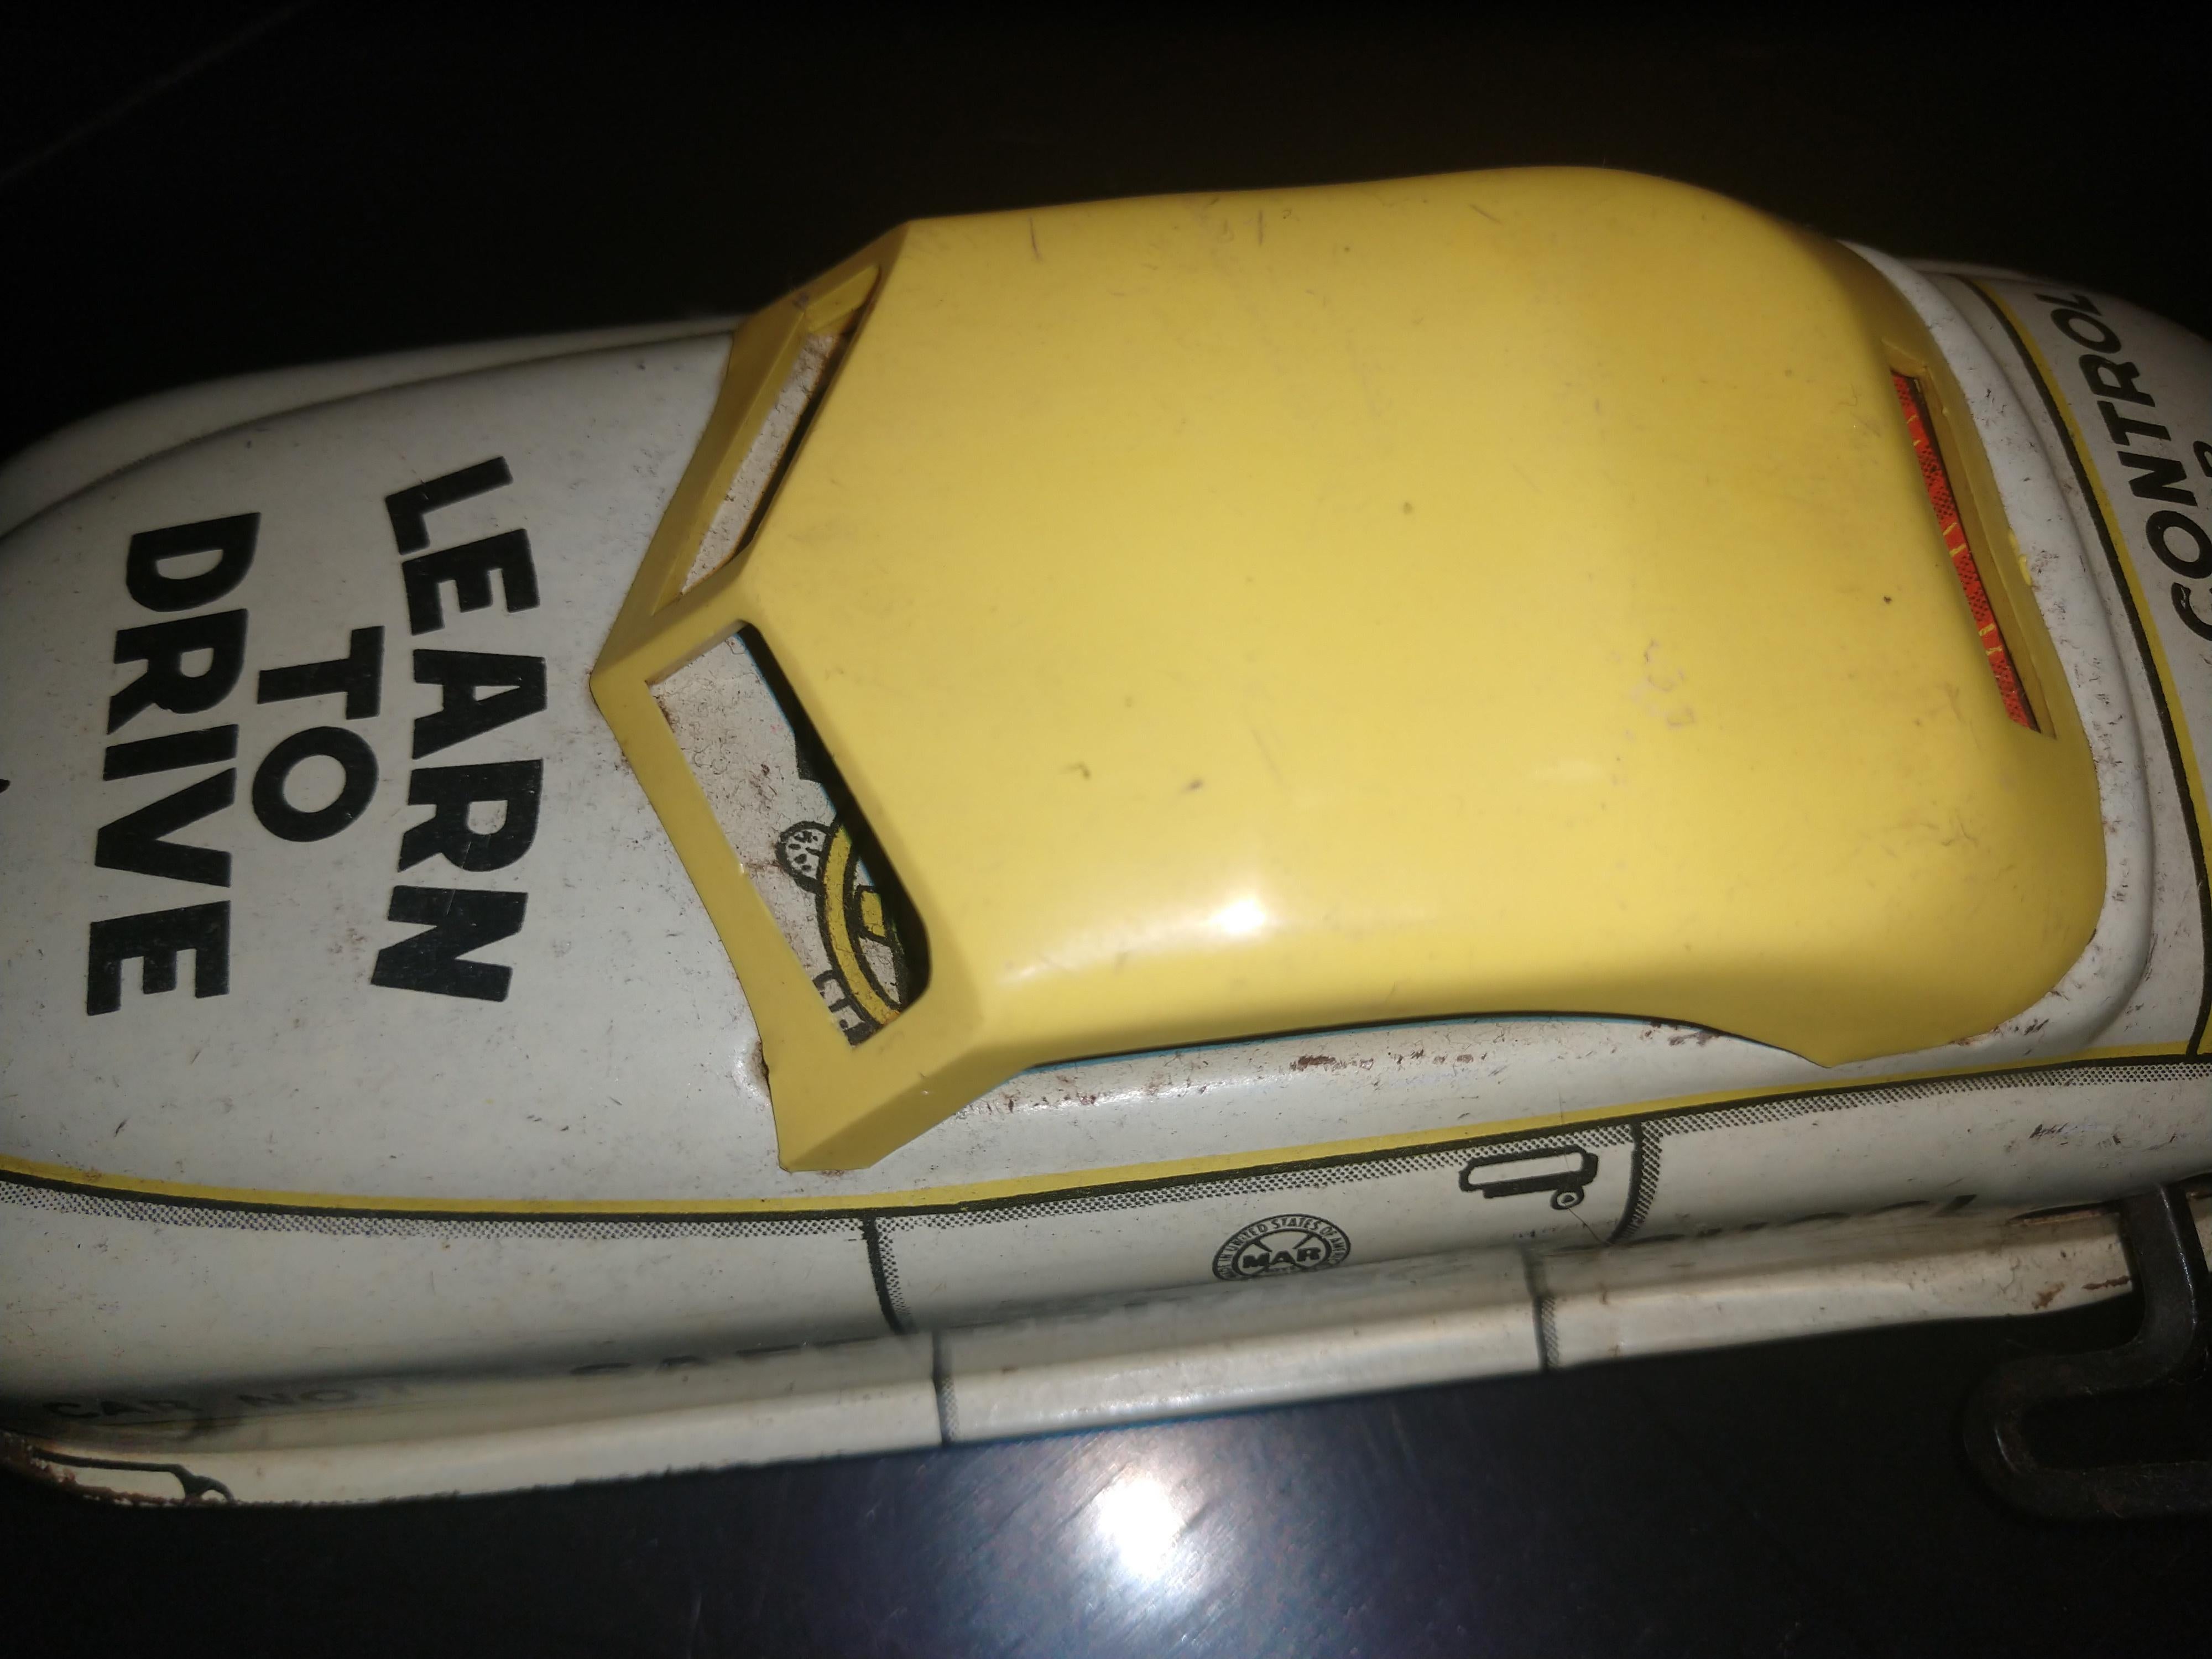 Windup tin Litho toy car with Dual action mechanism. When wound car has two windups that keep car moving and in some situations will prevent it from falling off of edges. Minor paint loss on front fender, graphics are still bright. Plastic roof.